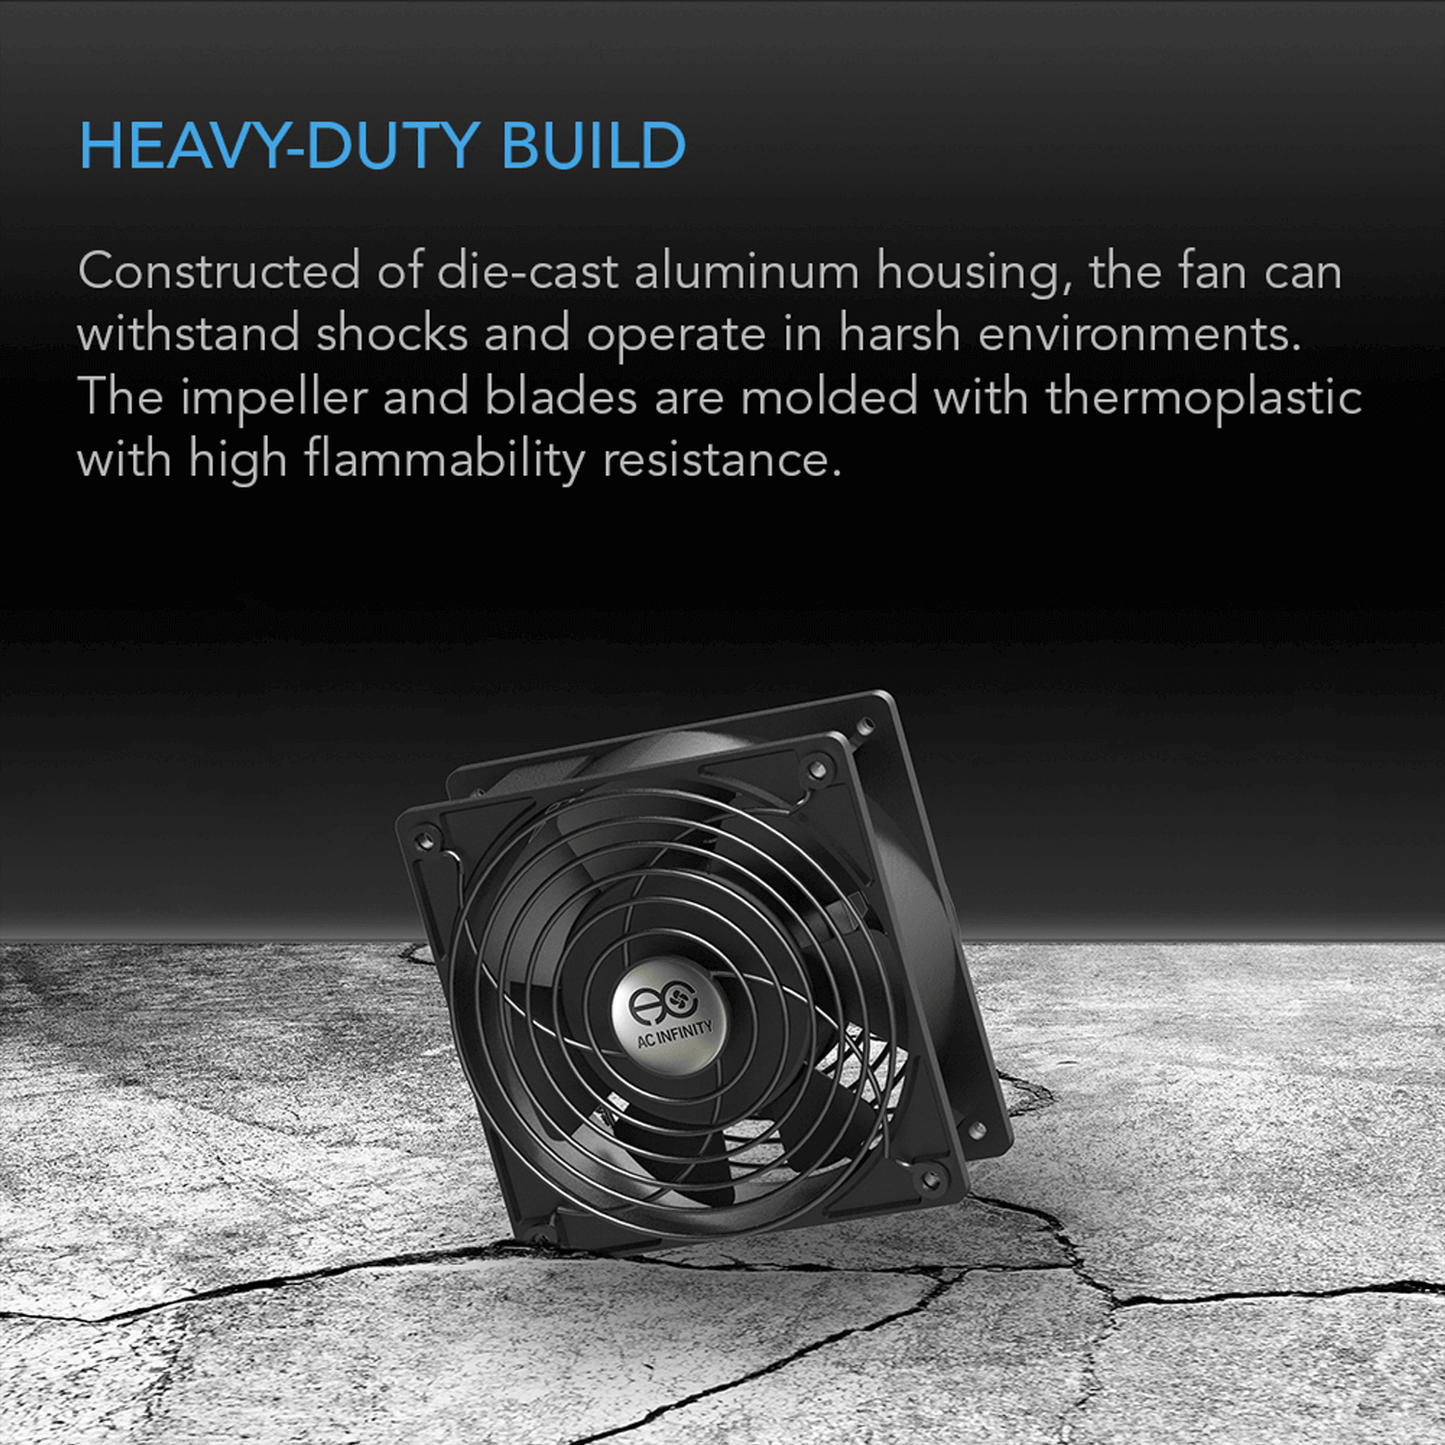 AC Infinity AXIAL 2060, Muffin 120V AC Cooling Fan, 200mm x 200mm x 60mm | HS2060A-X | Grow Tents Depot | Climate Control | 819137021402